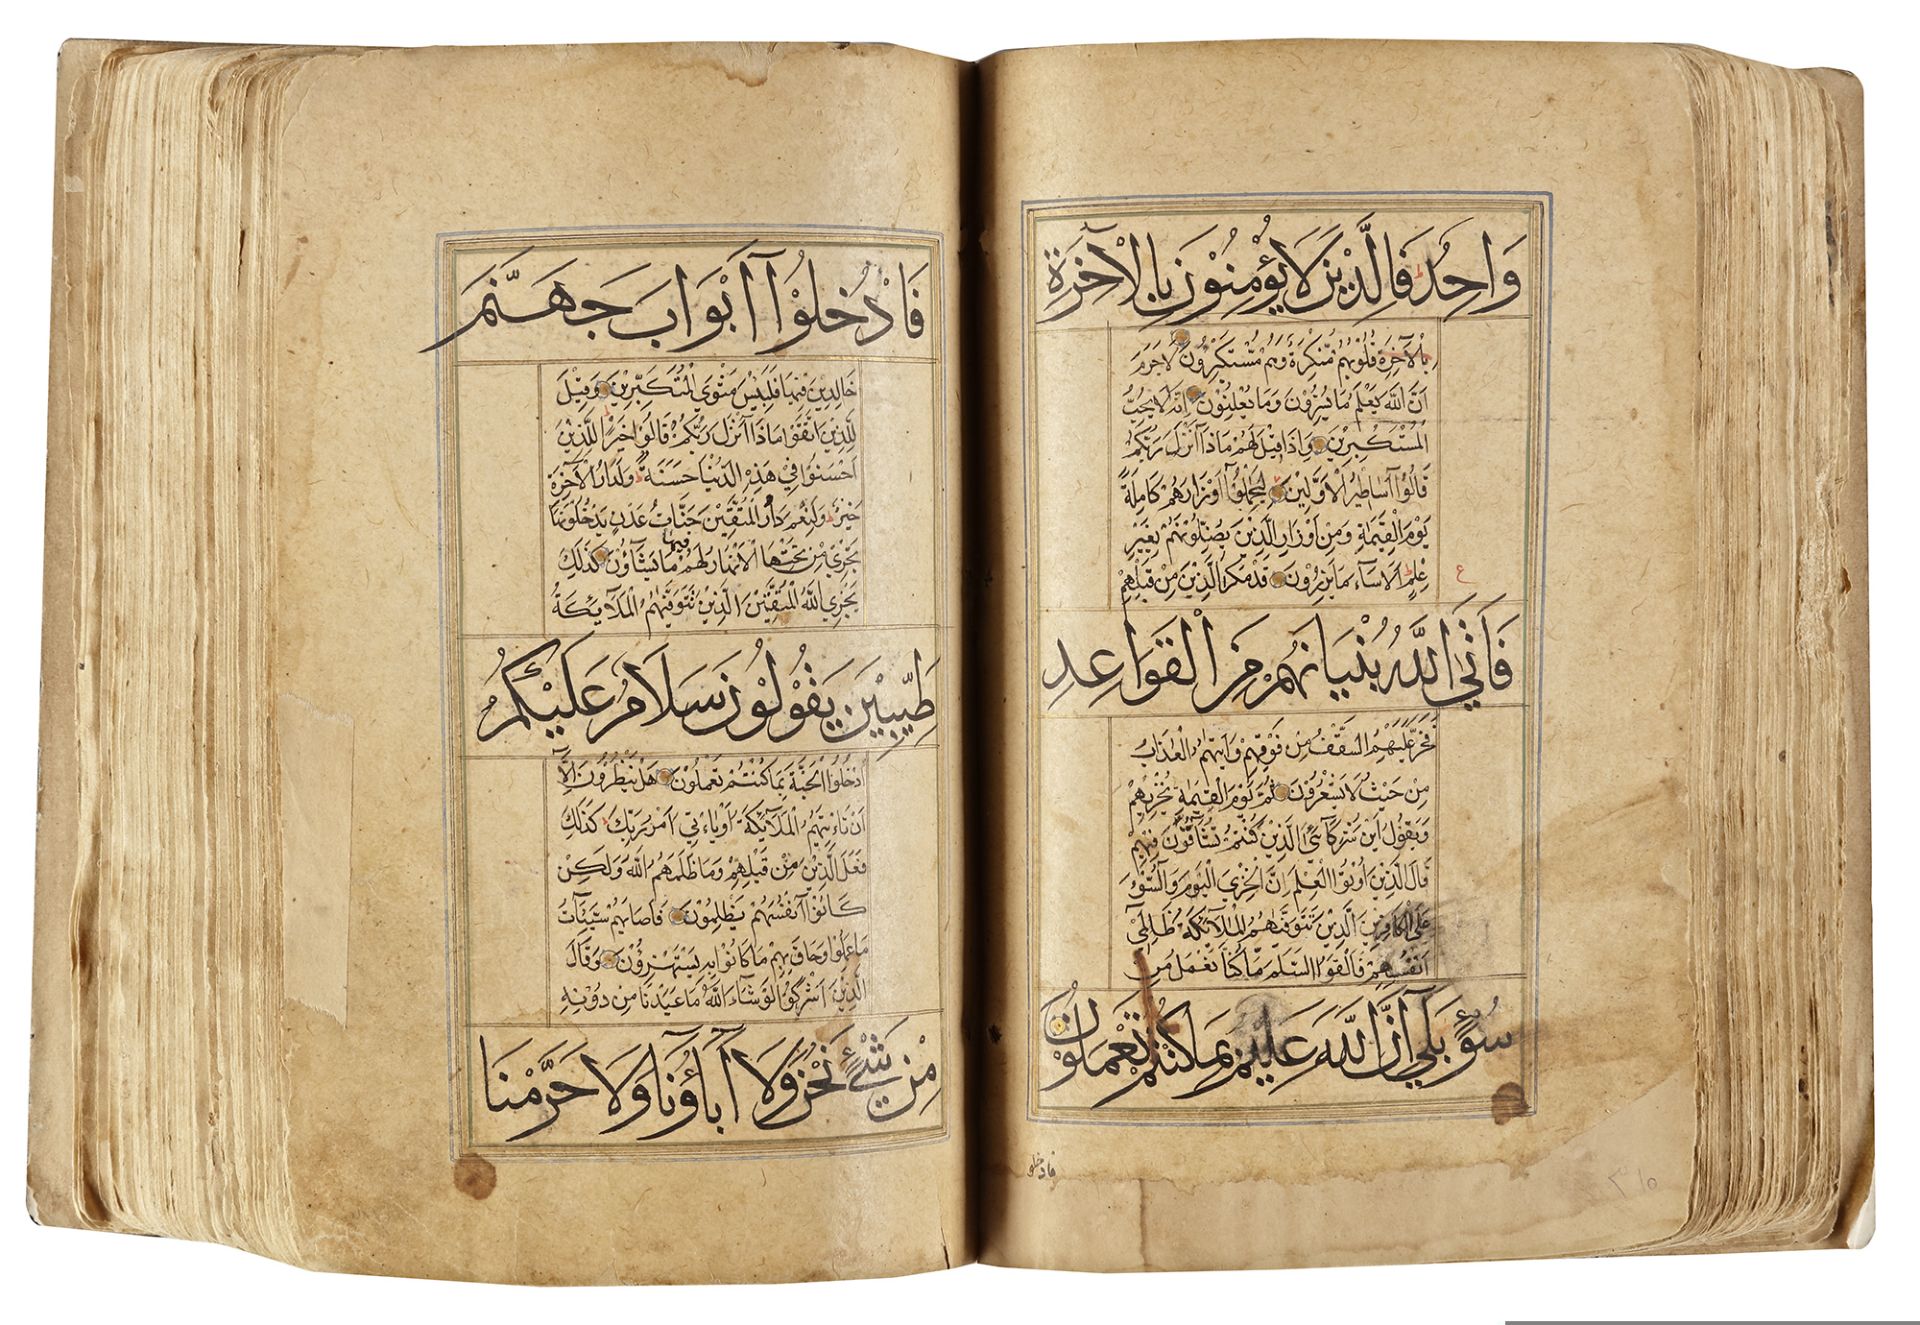 AN ILLUMINATED TIMURID QURAN, WRITTEN BY ABDULLAH IN 924 AH/1518 AD - Image 3 of 4